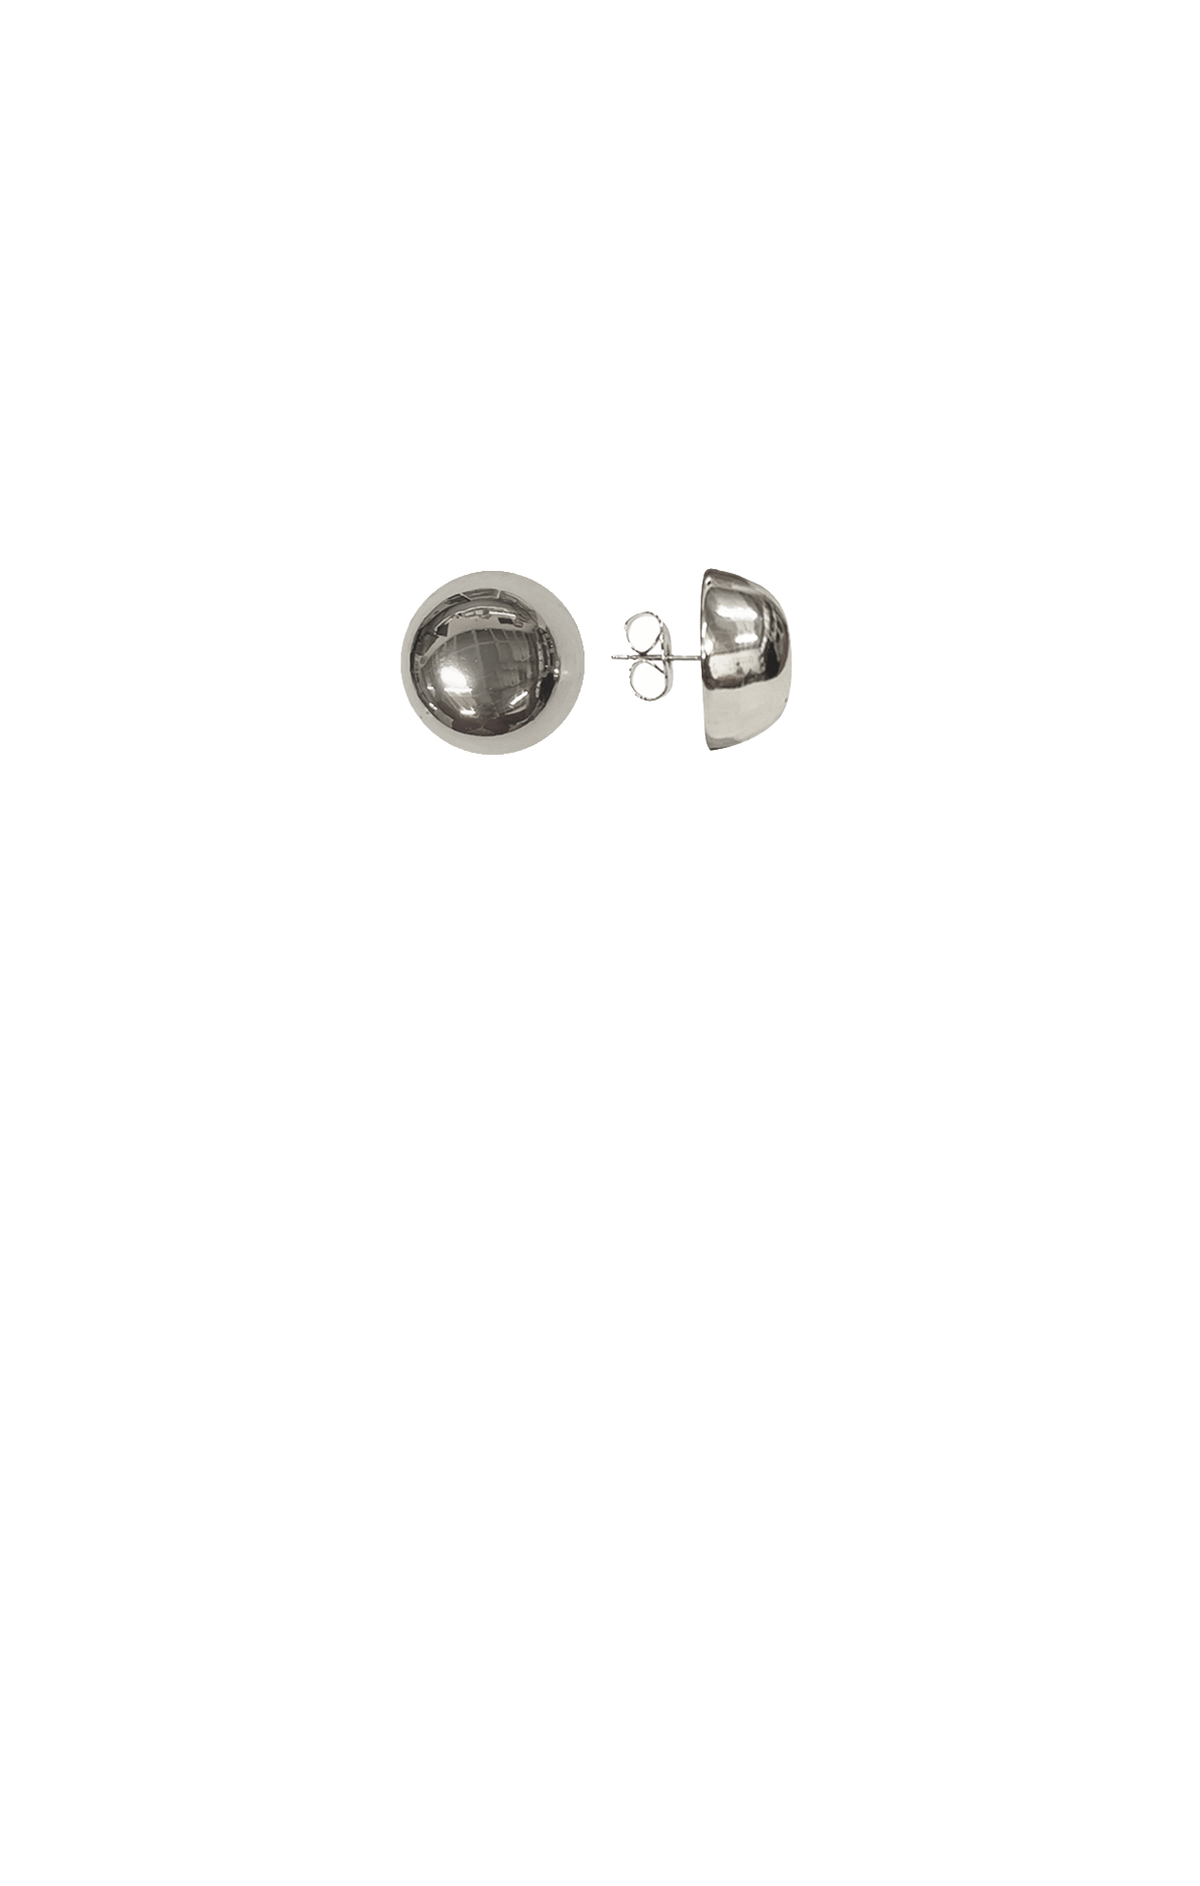 ACCESSORIES Earrings OS / SILVER POLISHED DOME STUD EARRING IN SILVER